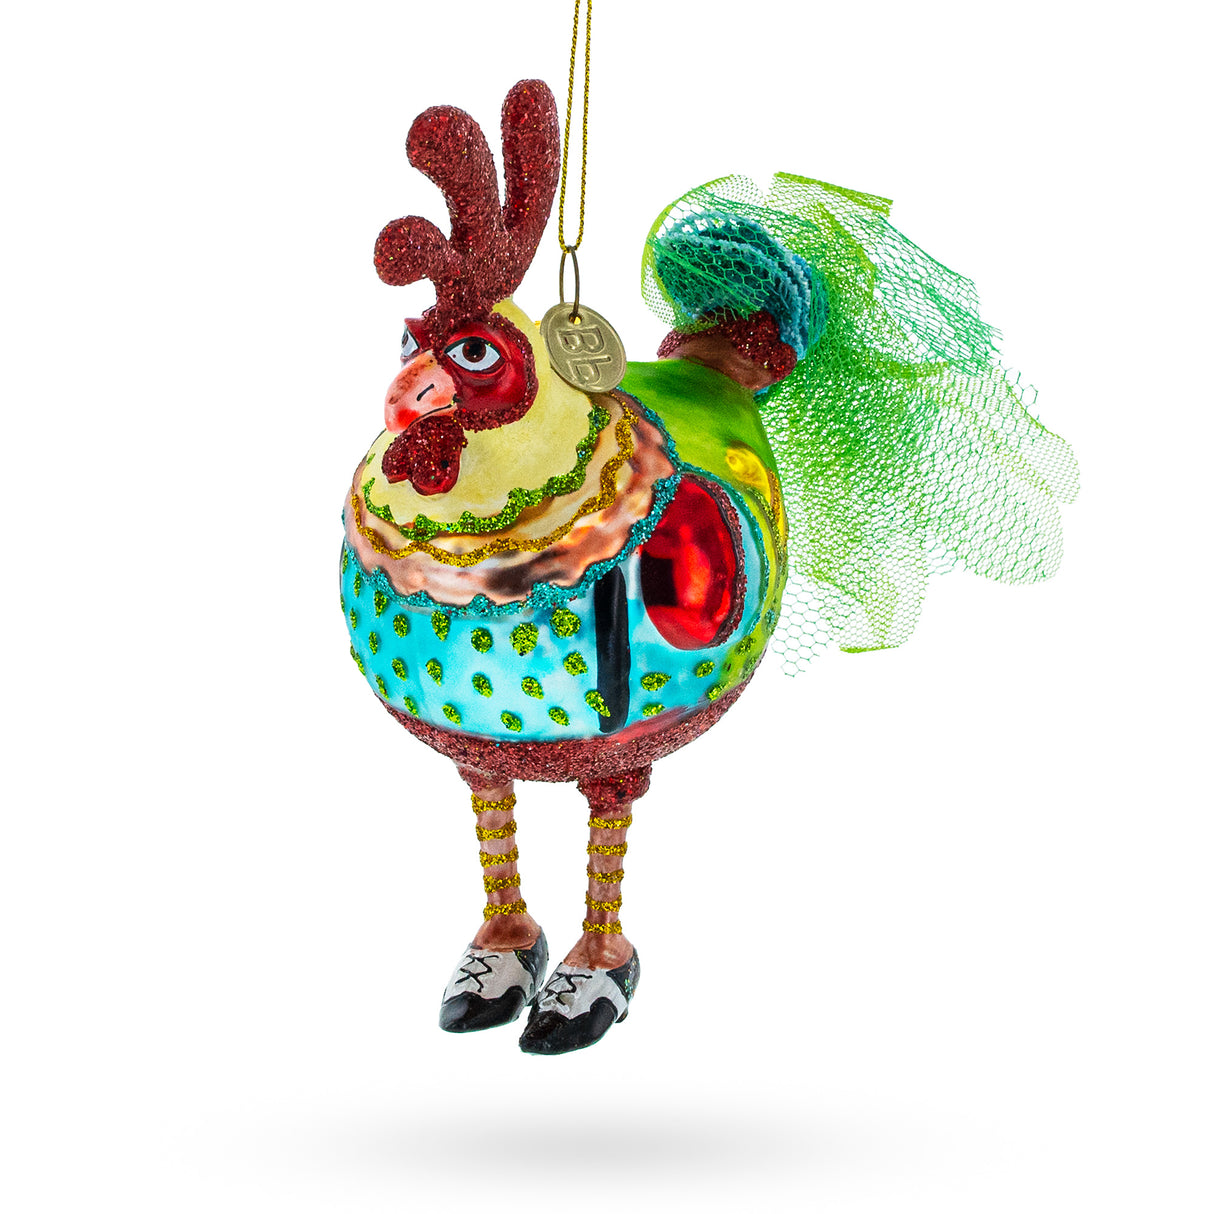 Glass Farmyard Fashionista: Hen in Dress and Shoes - Blown Glass Christmas Ornament in Multi color